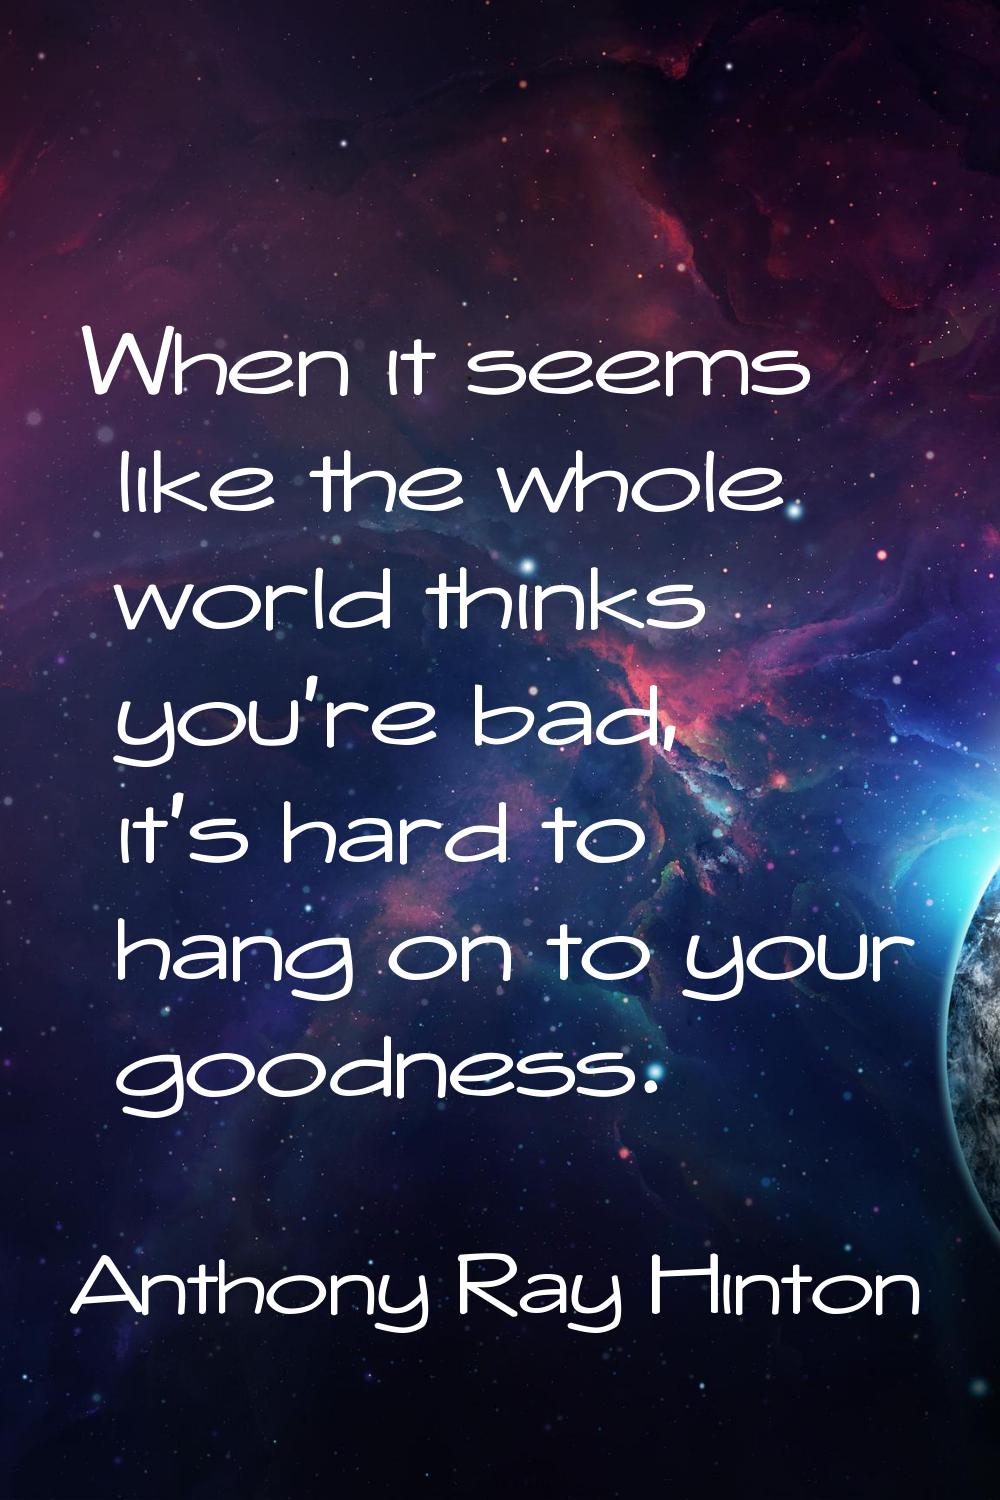 When it seems like the whole world thinks you're bad, it's hard to hang on to your goodness.